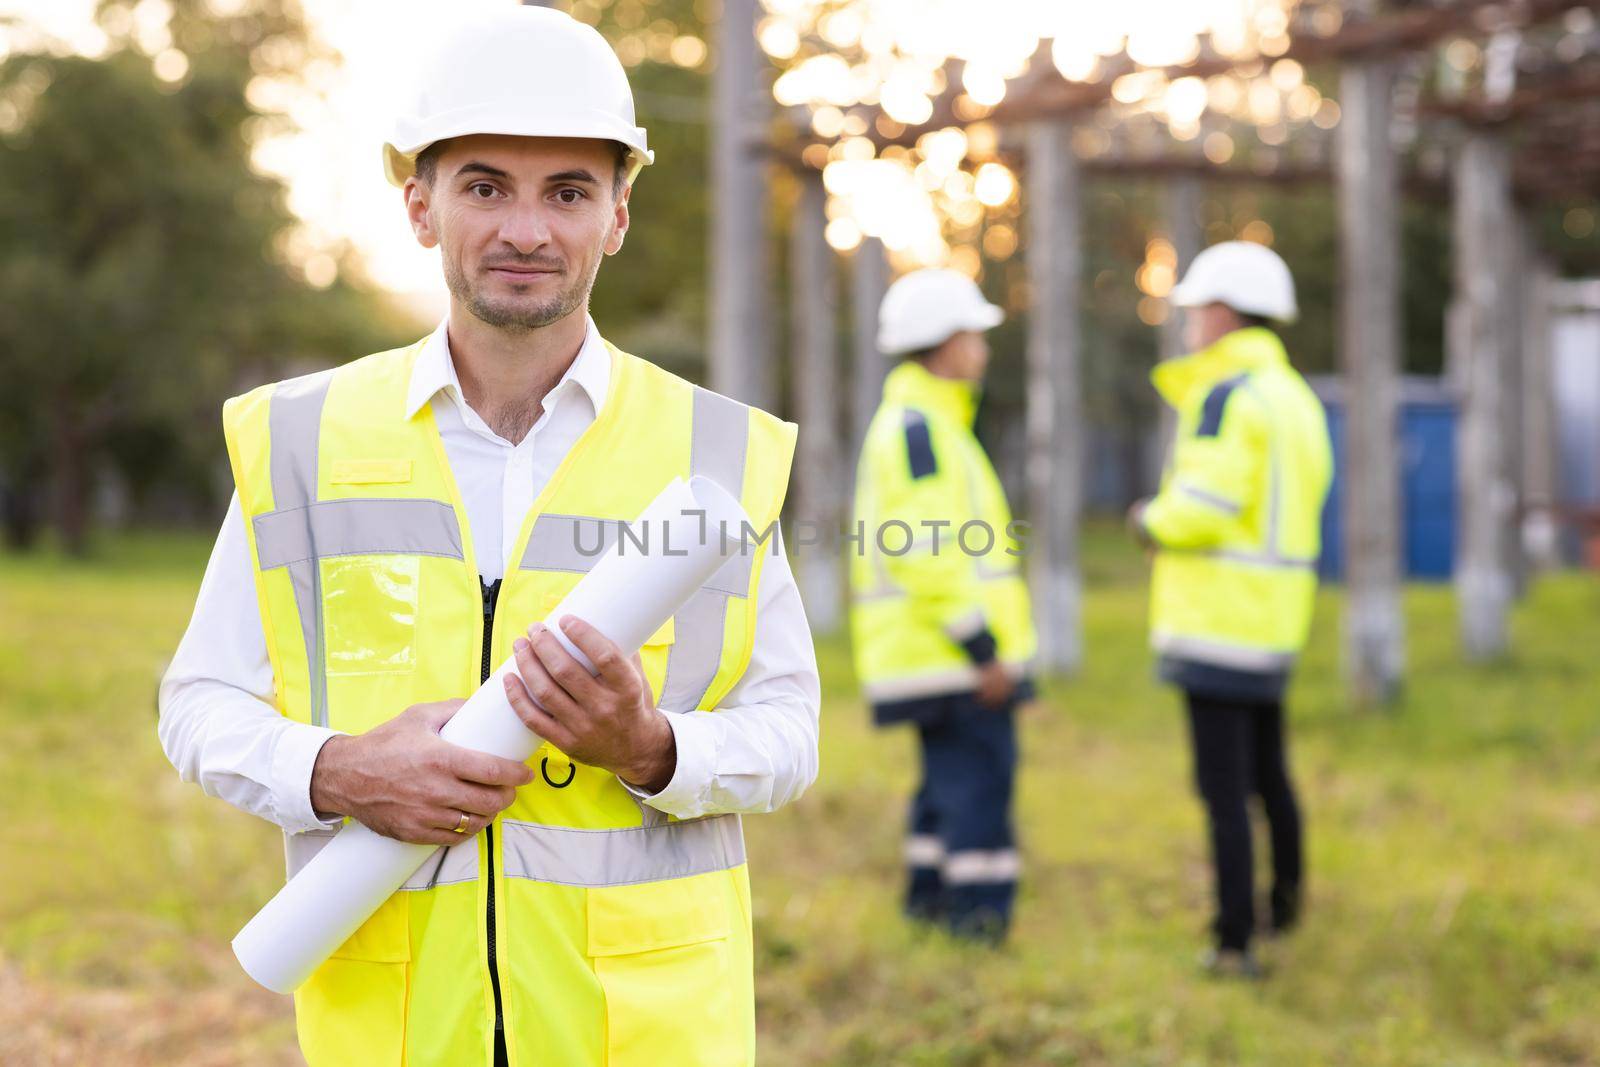 Portrait of engineer. Professional electrical industry engineer smiling and looking at the camera . Workers wearing safety uniform and hard hat with high voltage electrical lines background.